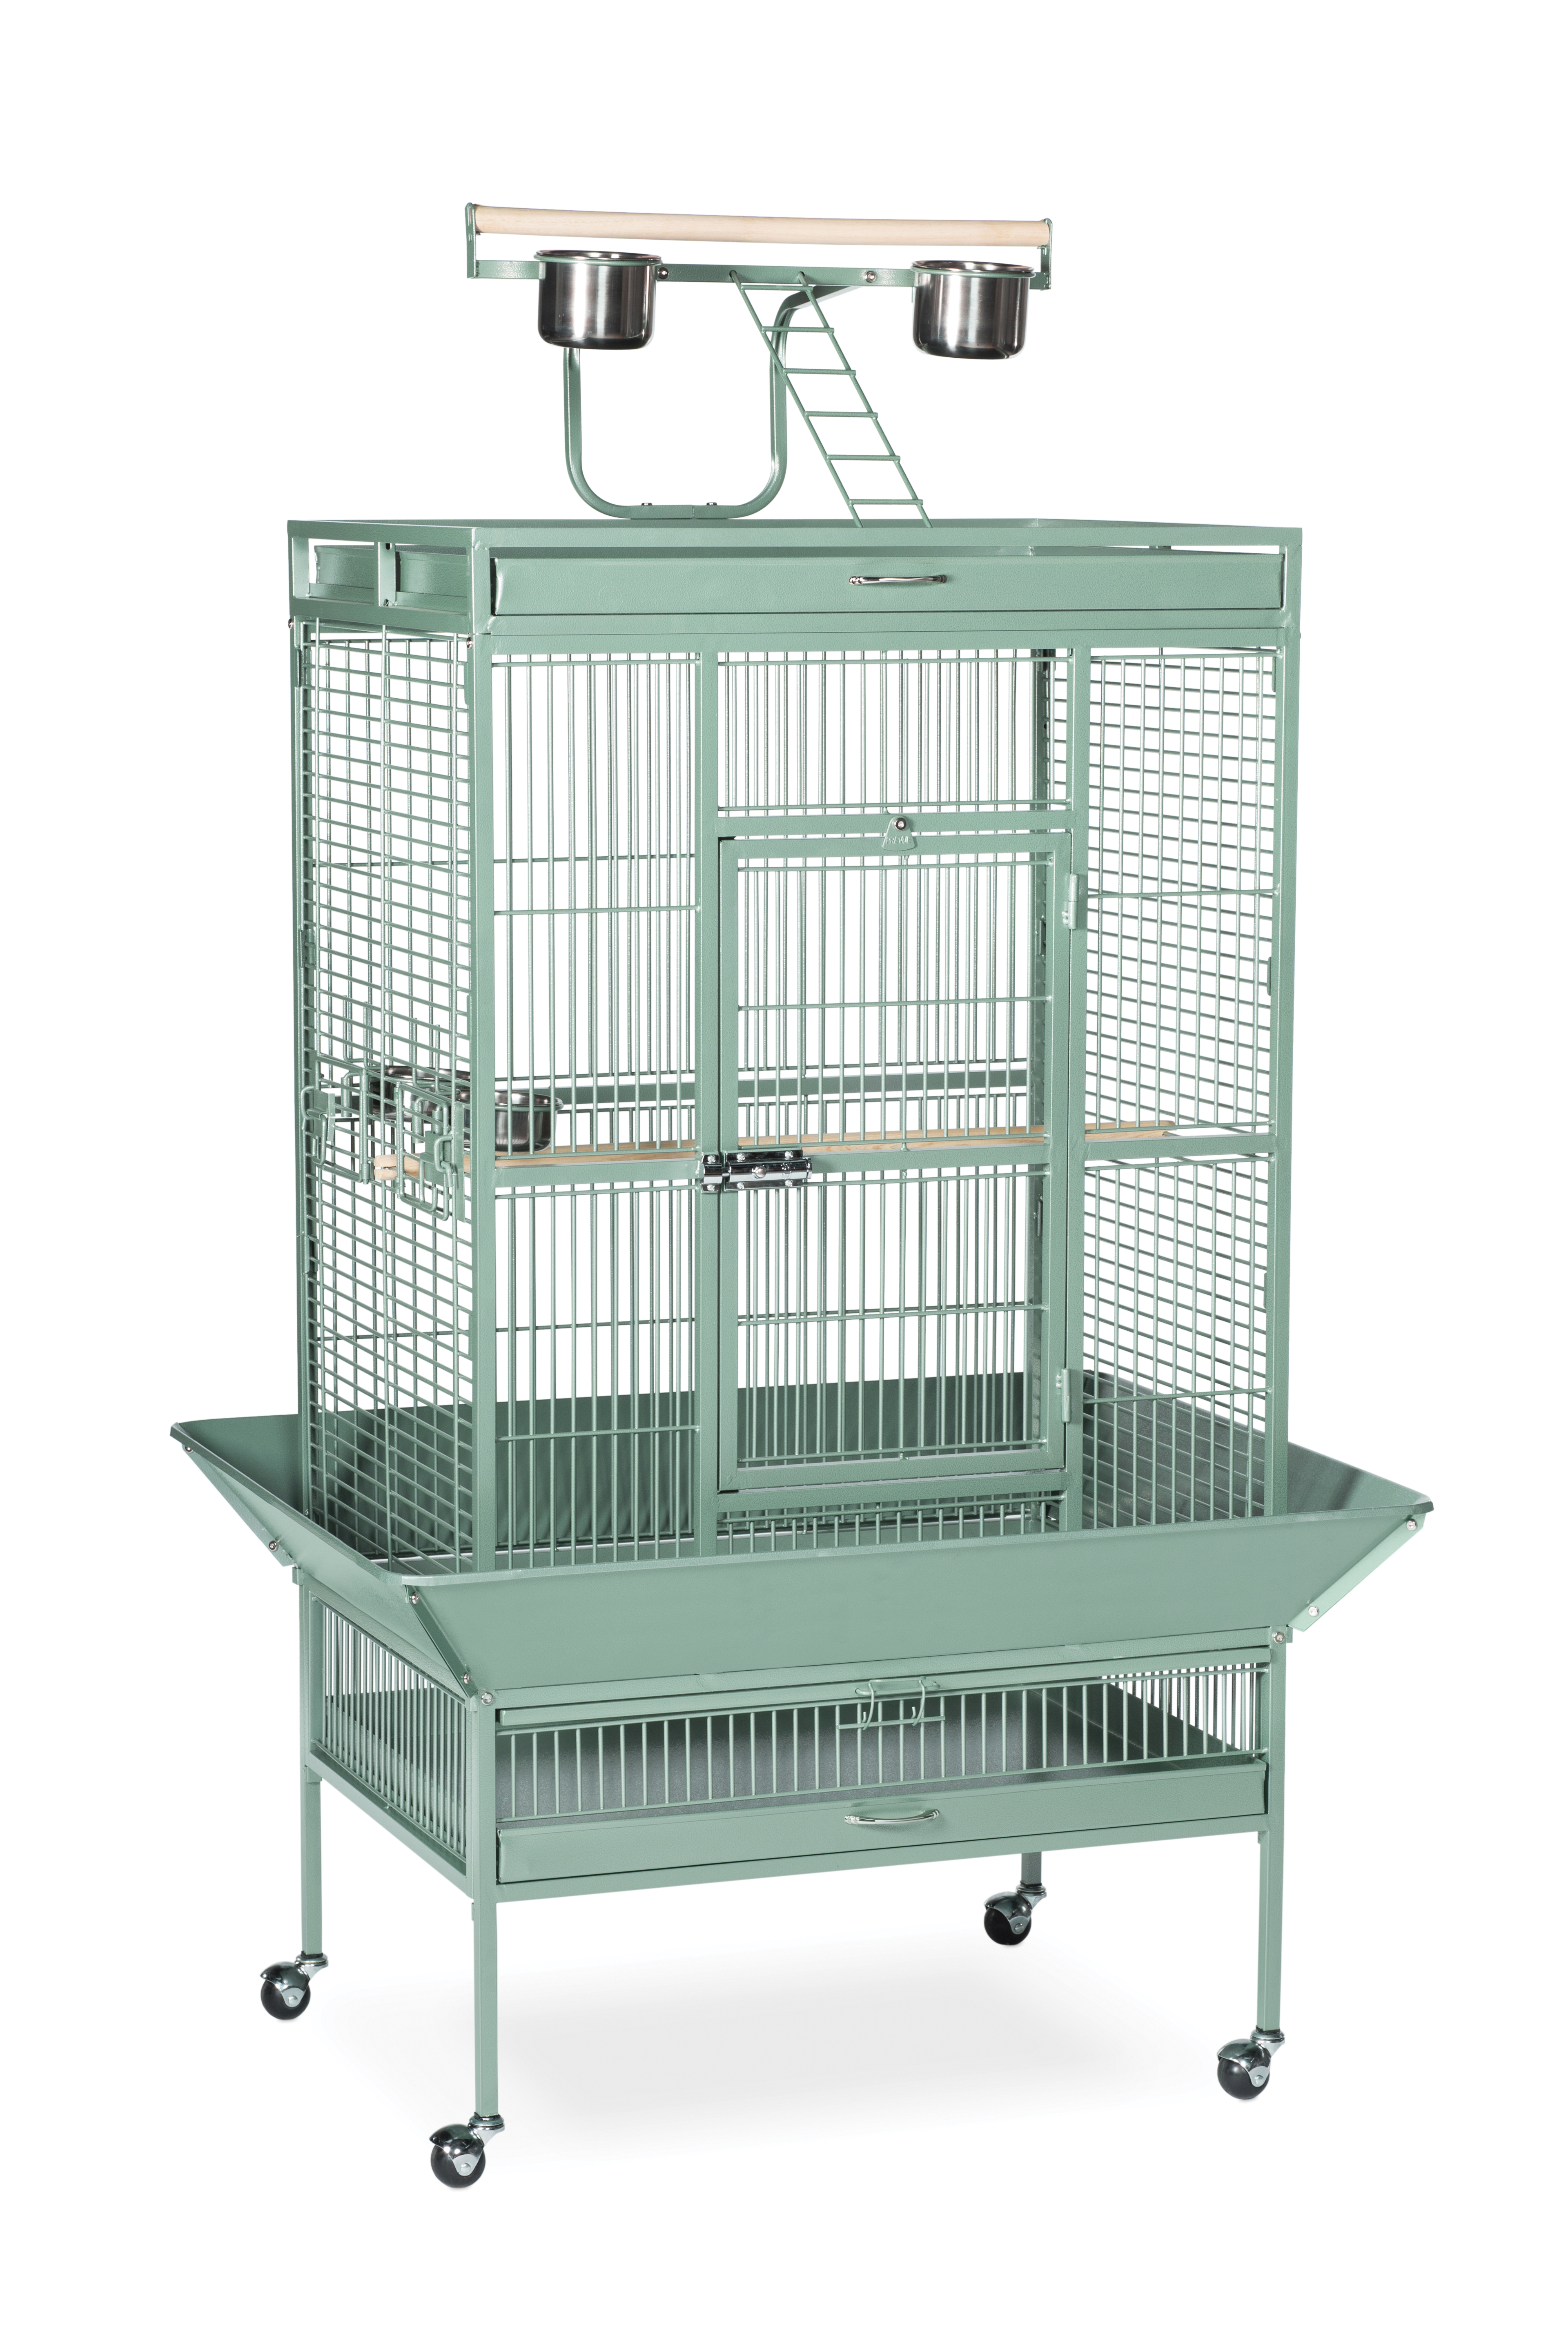 Medium Playtop Bird Cage from Prevue Pets (3153( with 4